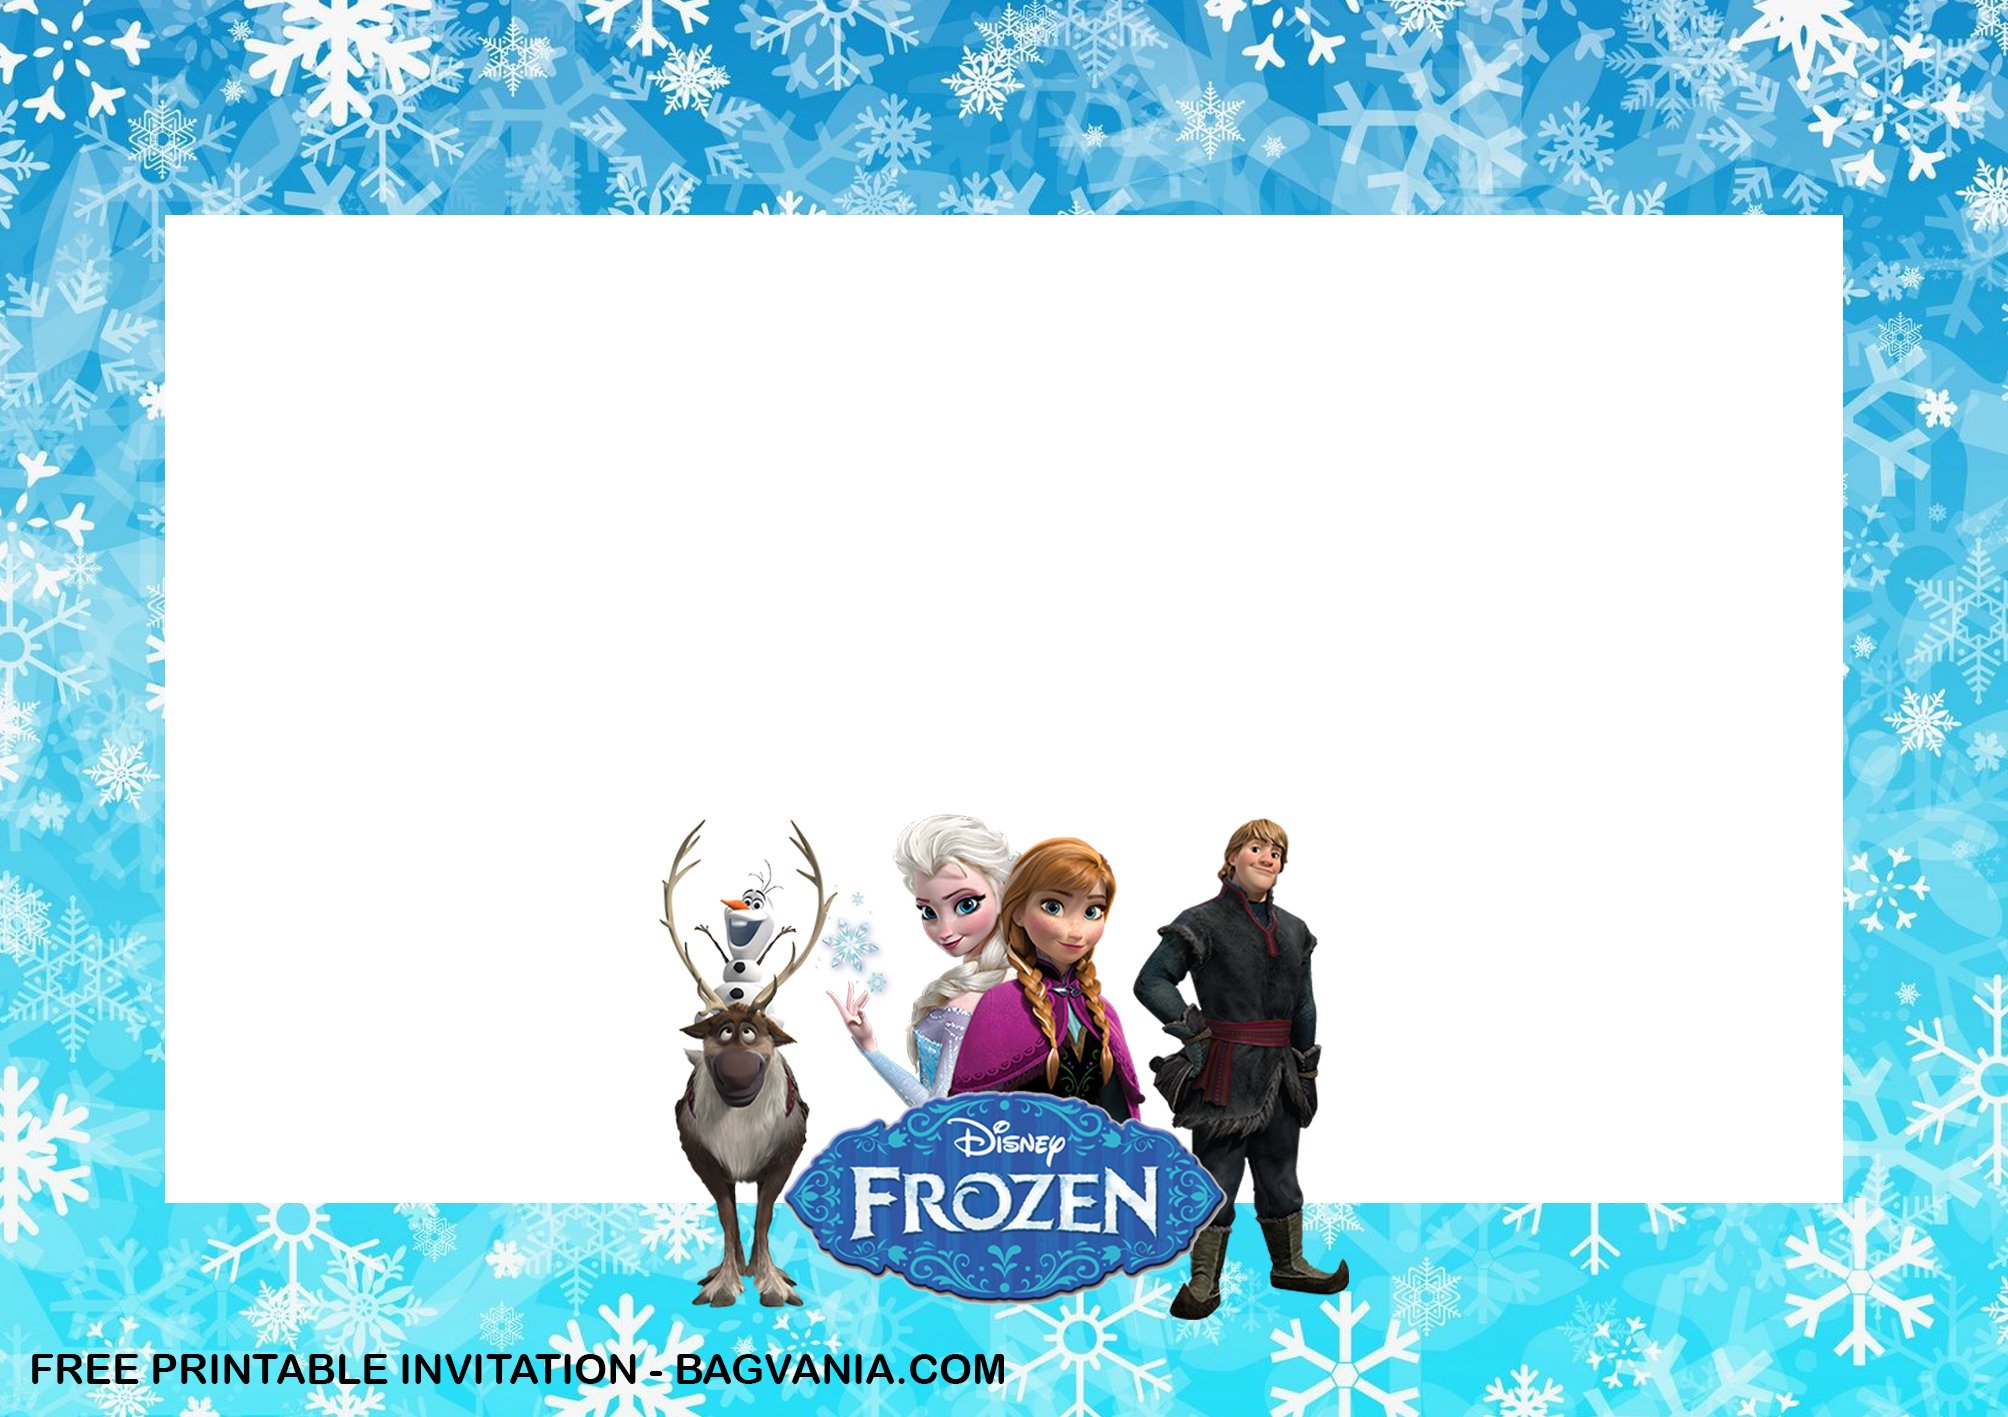 FREE Printable) – Anna and Elsa Frozen Birthday Invitation Intended For Frozen Birthday Card Template